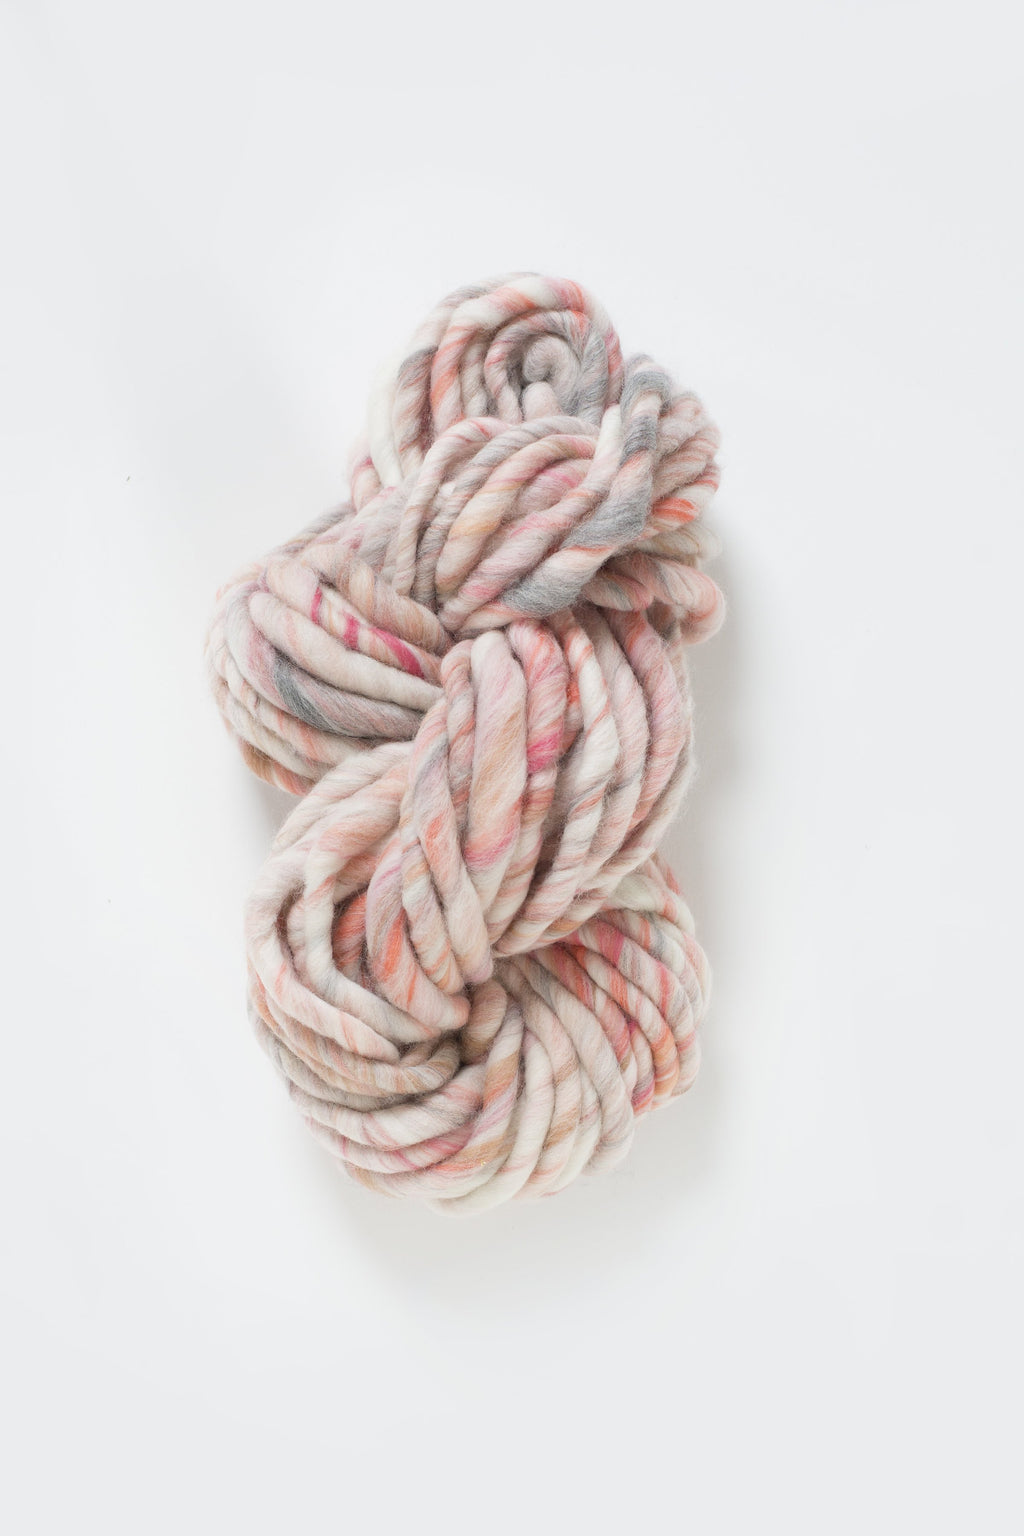 Wanderlust in Peachy Keen - super bulky and chunky handspun yarn by knit collage